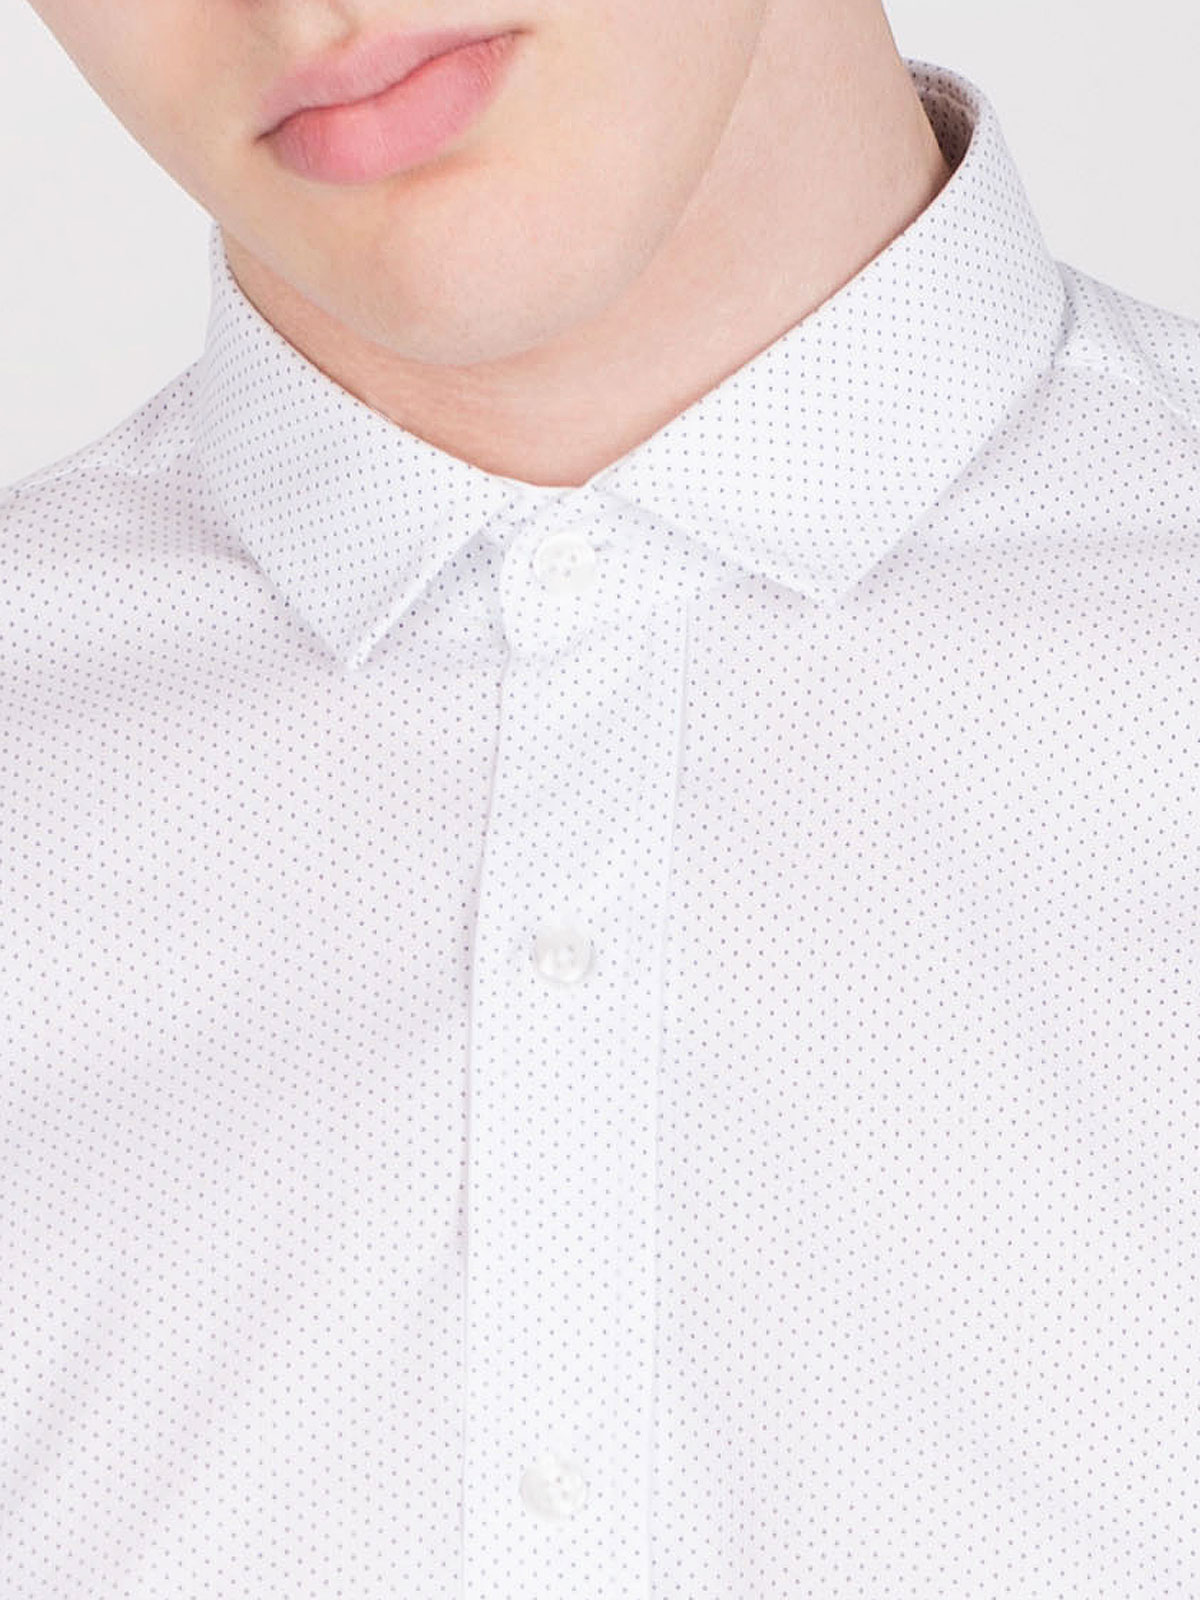  white shirt with black dots  - 21460 € 34.90 img2